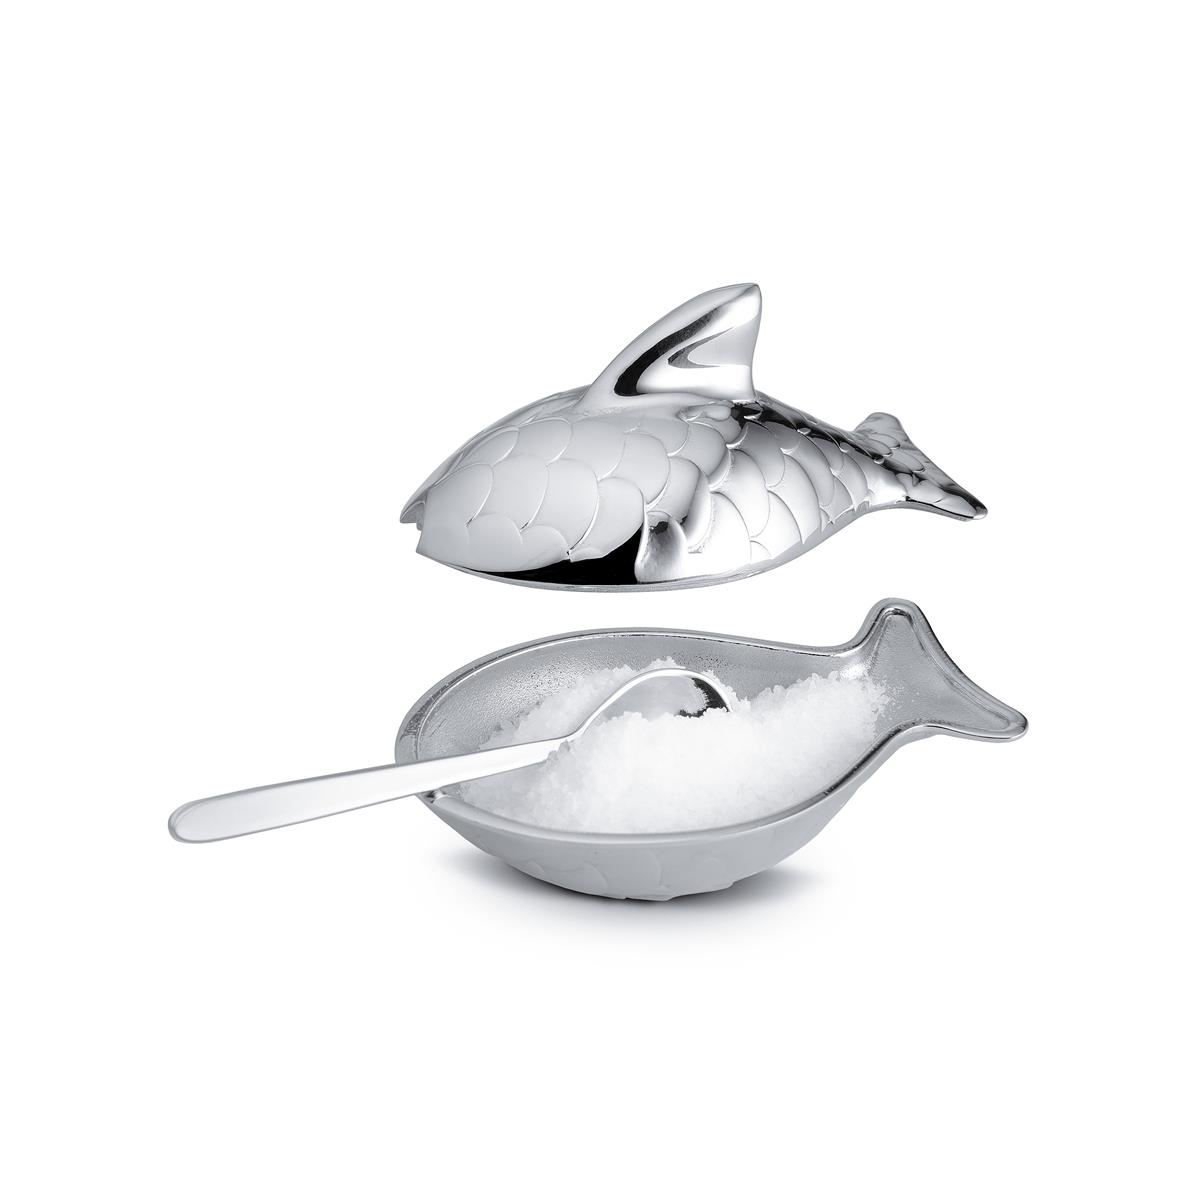 Alessi-Colombina fish Salt cellar with spoon in 18/10 stainless steel